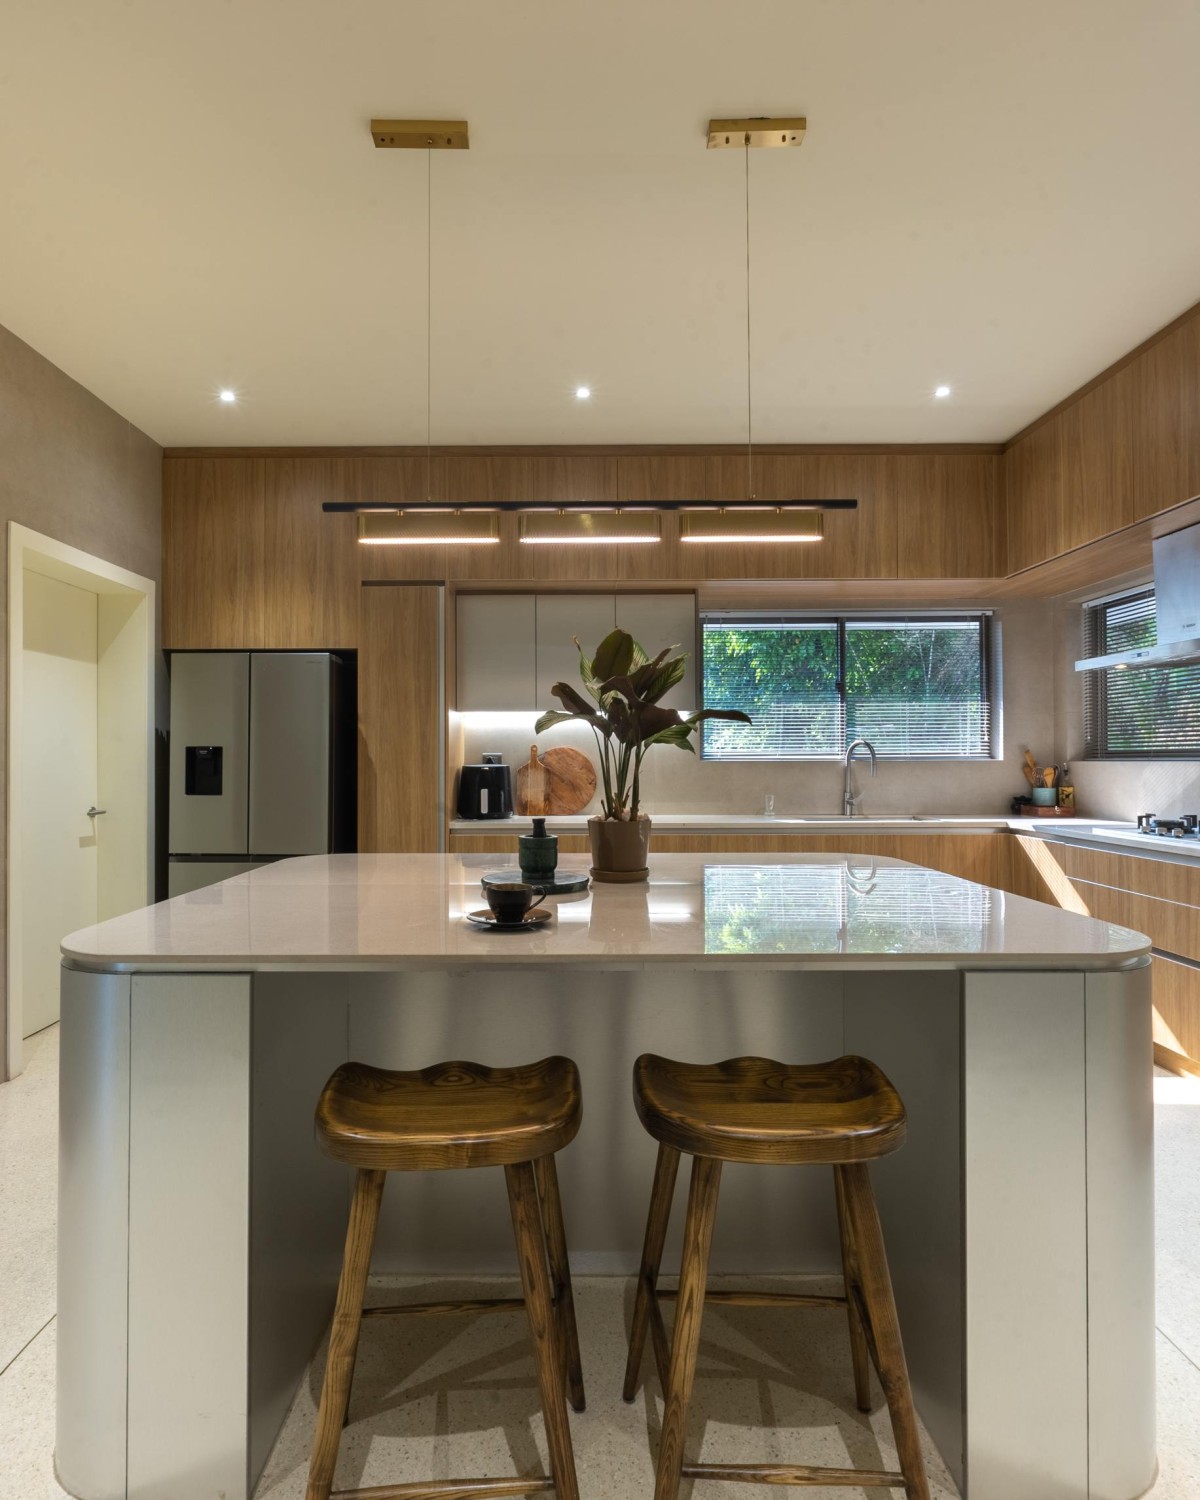 Kitchen of Ameer Residence by Nou Architects